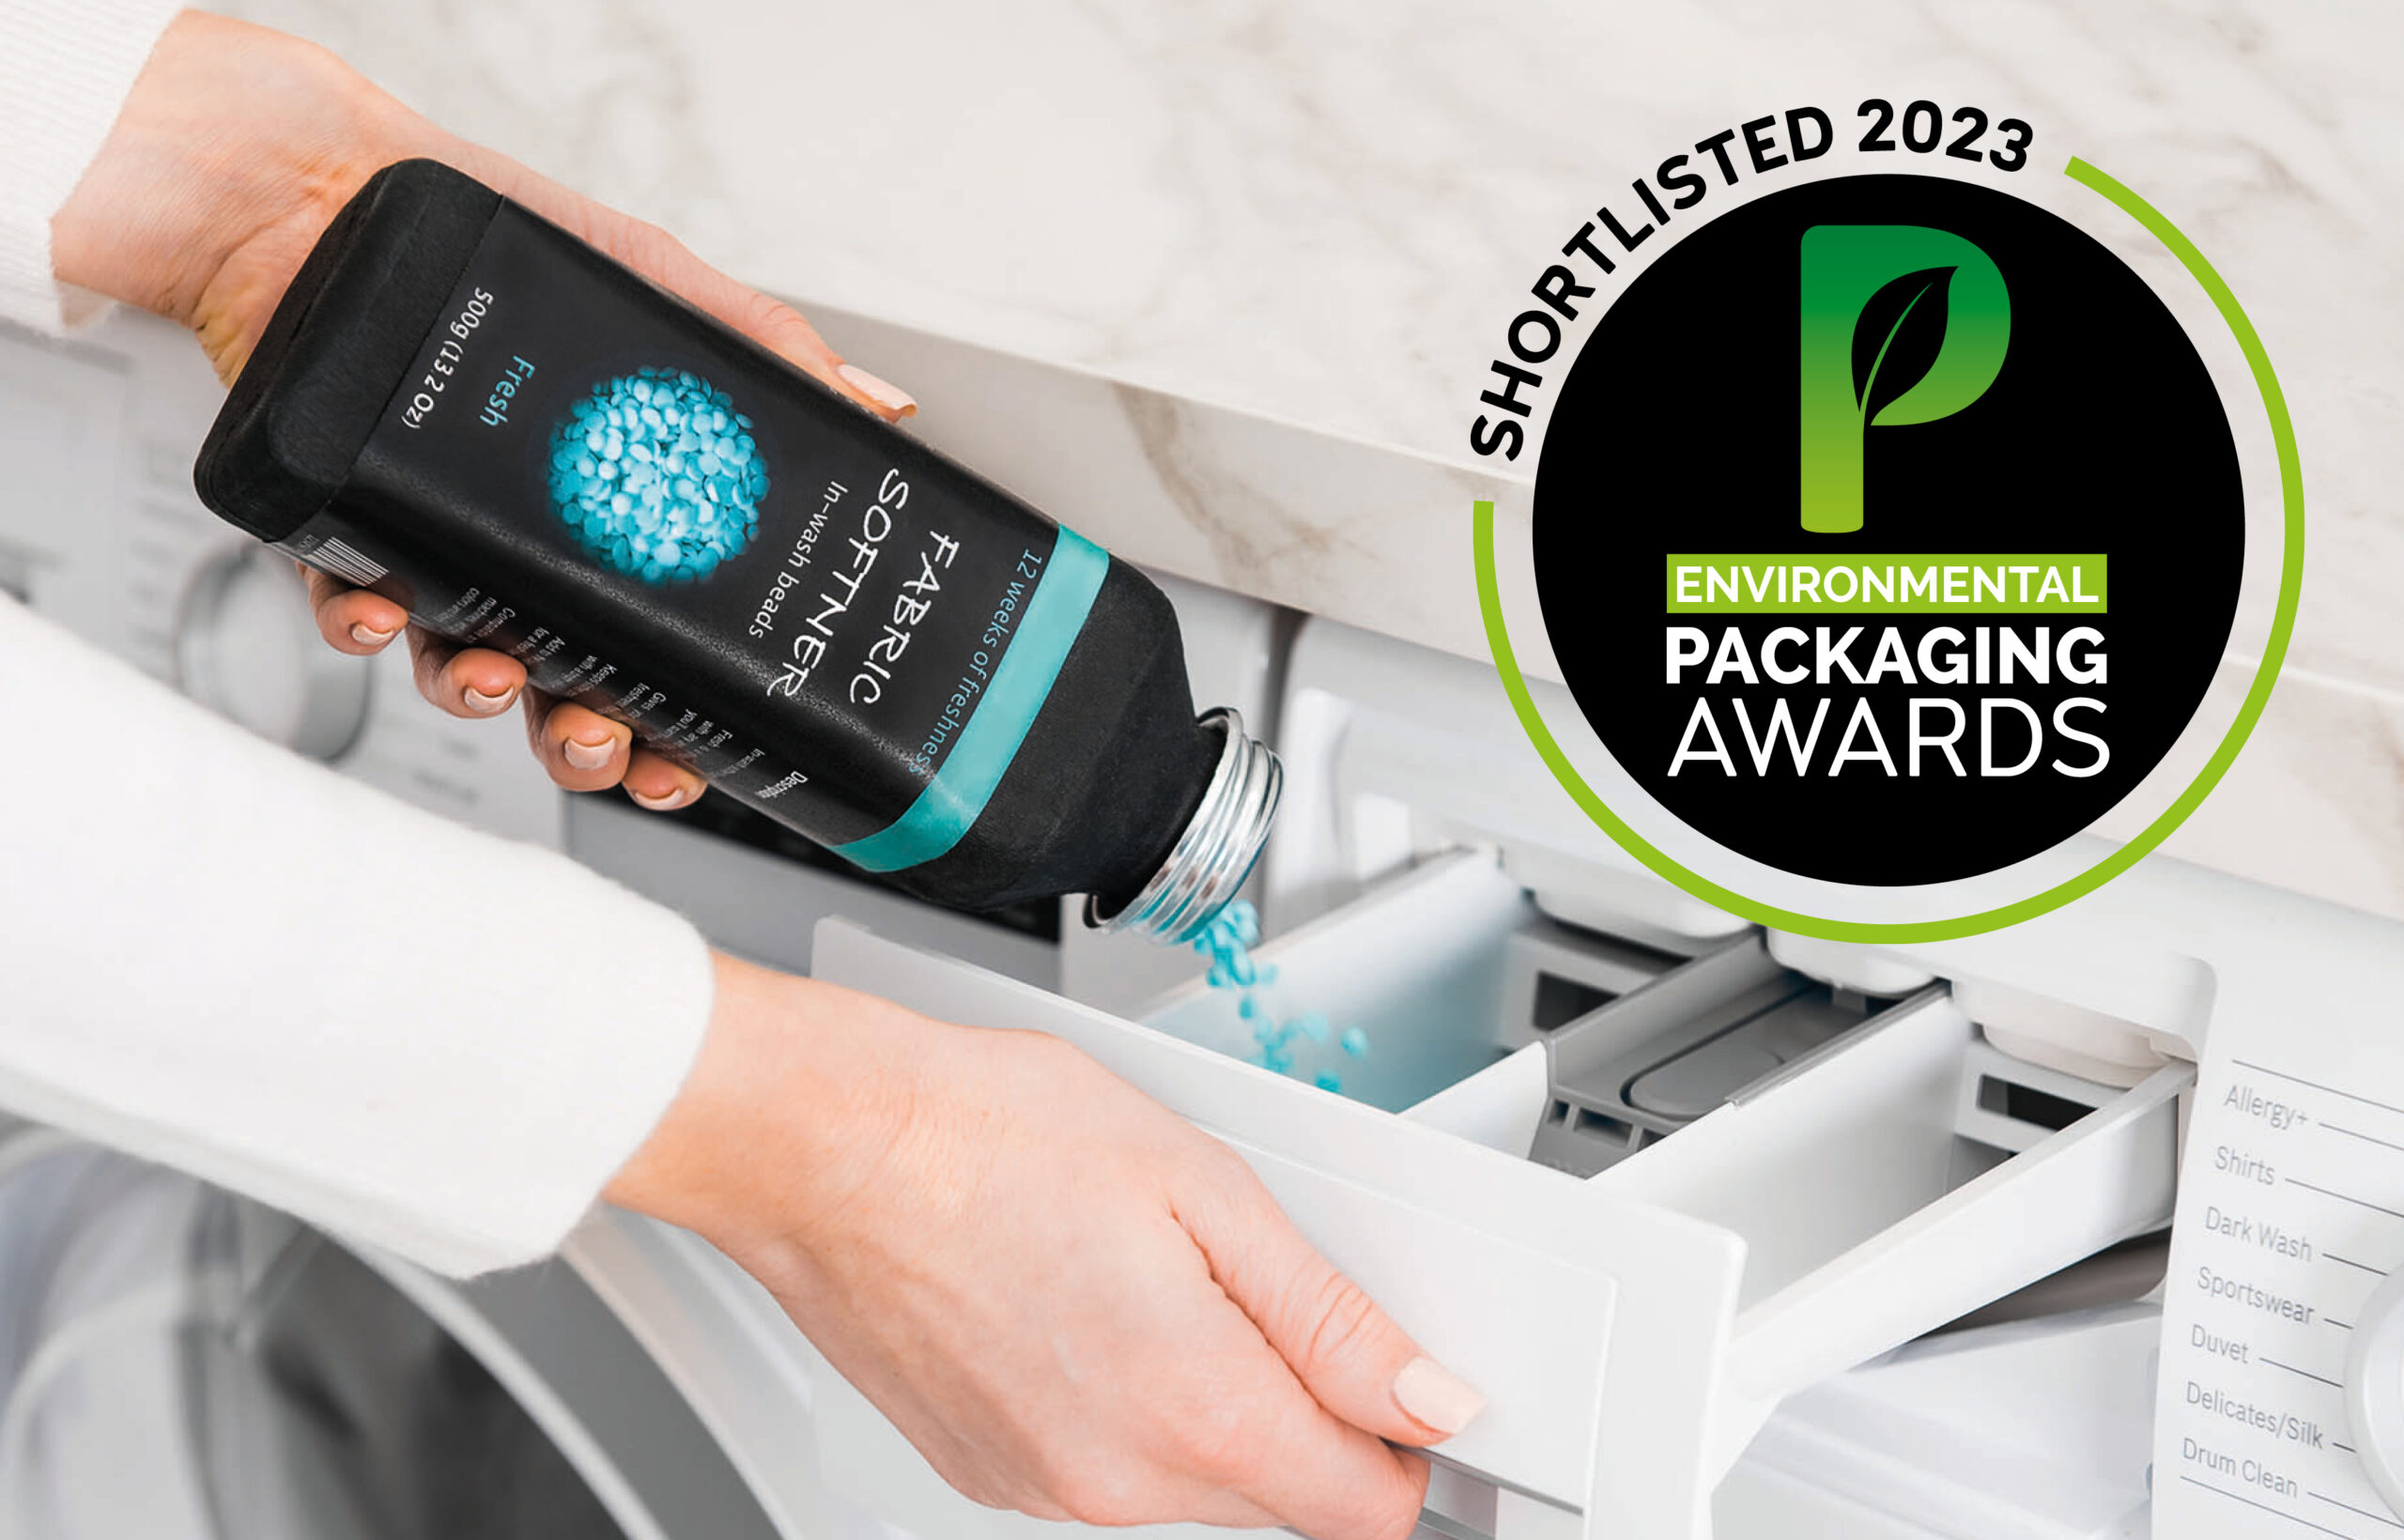 Cullen’s Fibre Bottle shortlisted at the Environmental Packaging Awards Featured Image